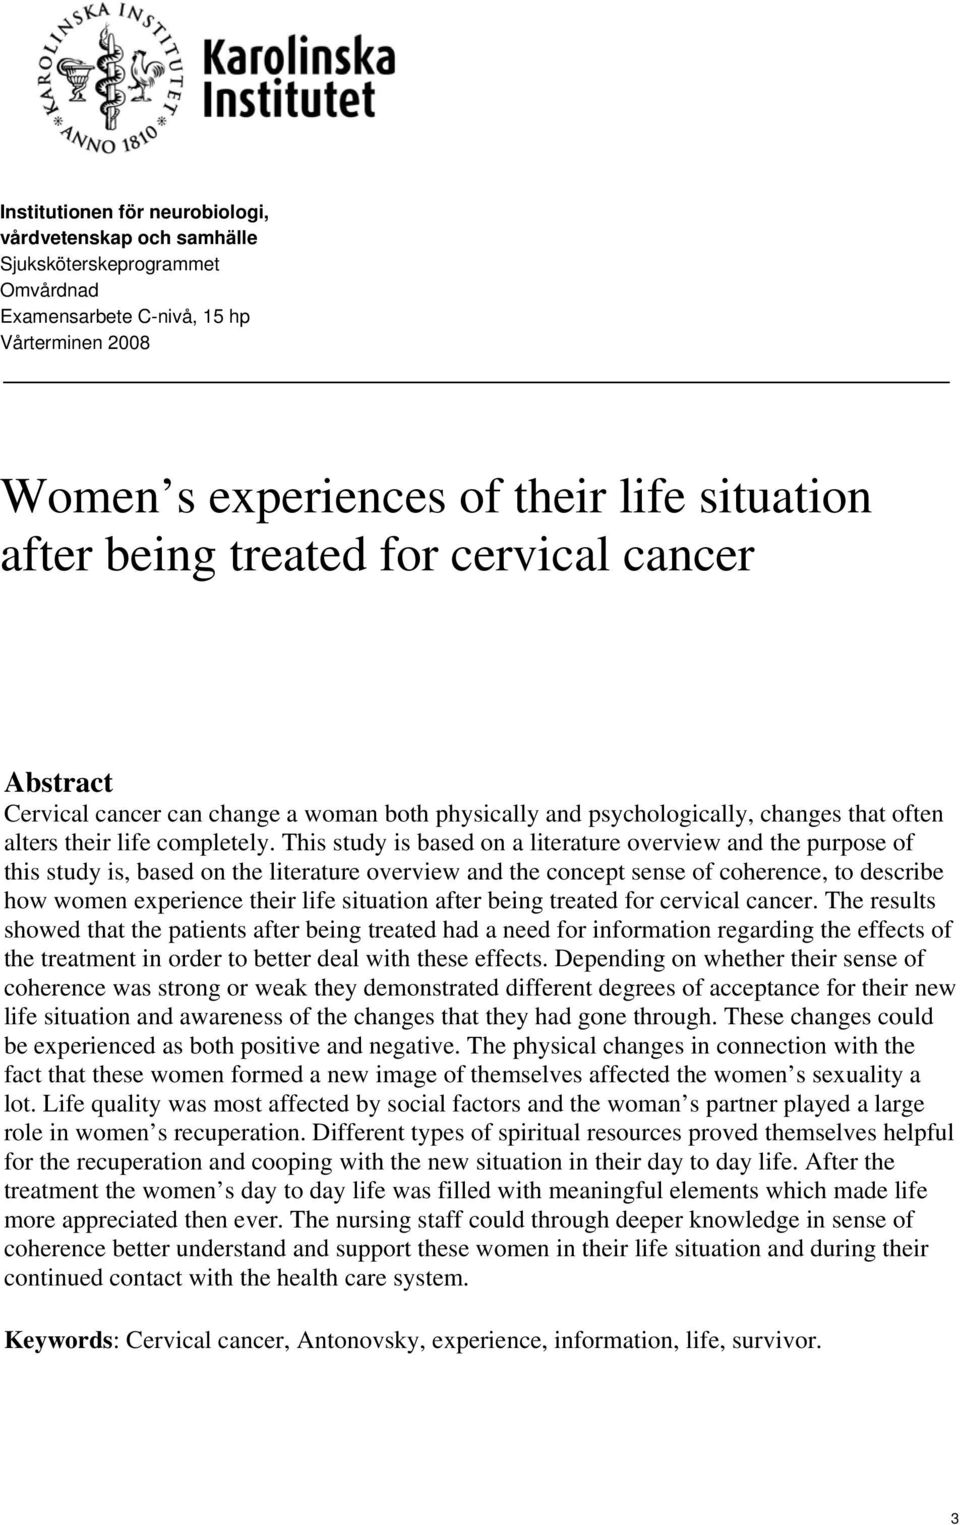 This study is based on a literature overview and the purpose of this study is, based on the literature overview and the concept sense of coherence, to describe how women experience their life